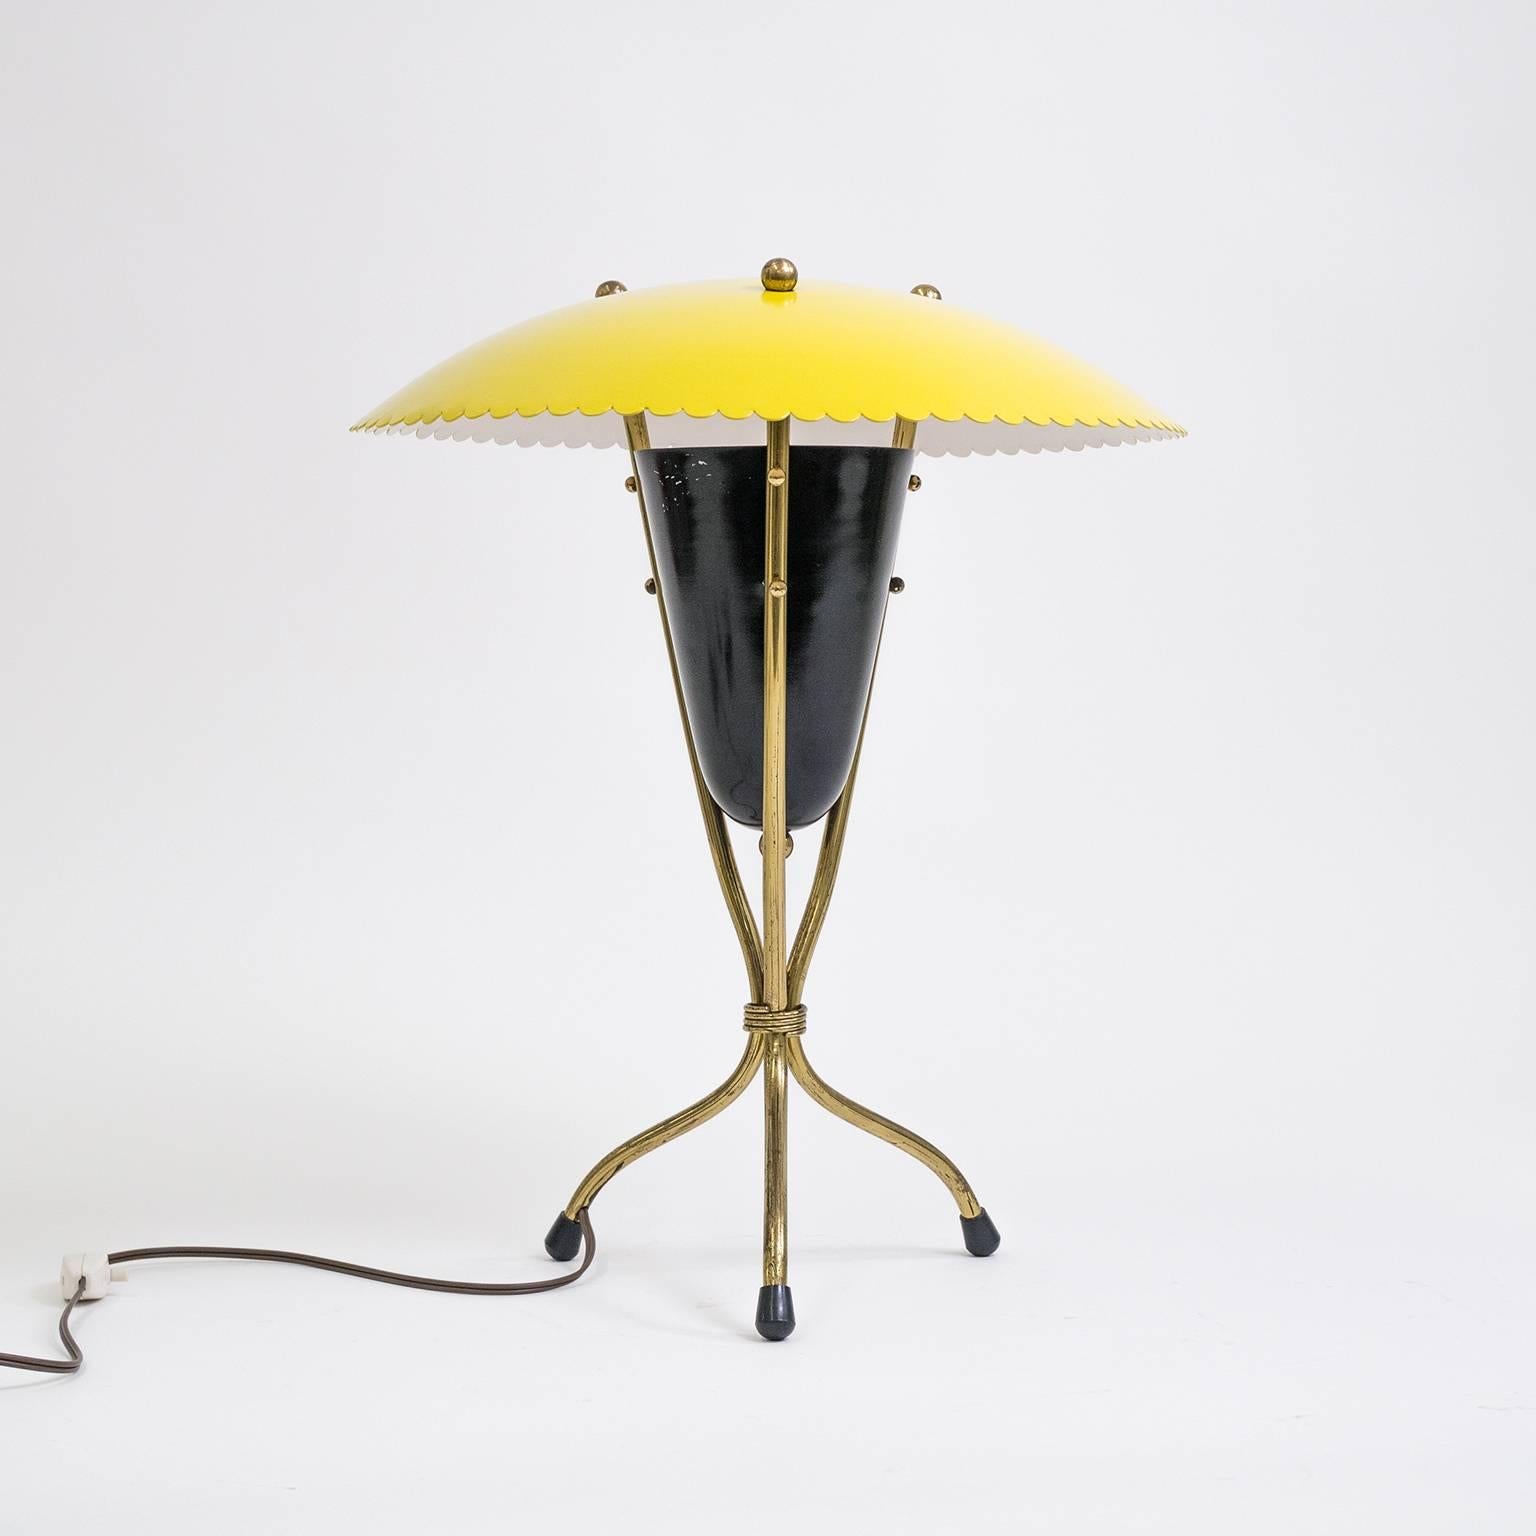 Charming midcentury Italian tripod table or desk lamp in brass and lacquered aluminium. The central black cone houses the light source which is reflected off the large scalloped shade for a soft indirect light. Very nice condition with a lovely